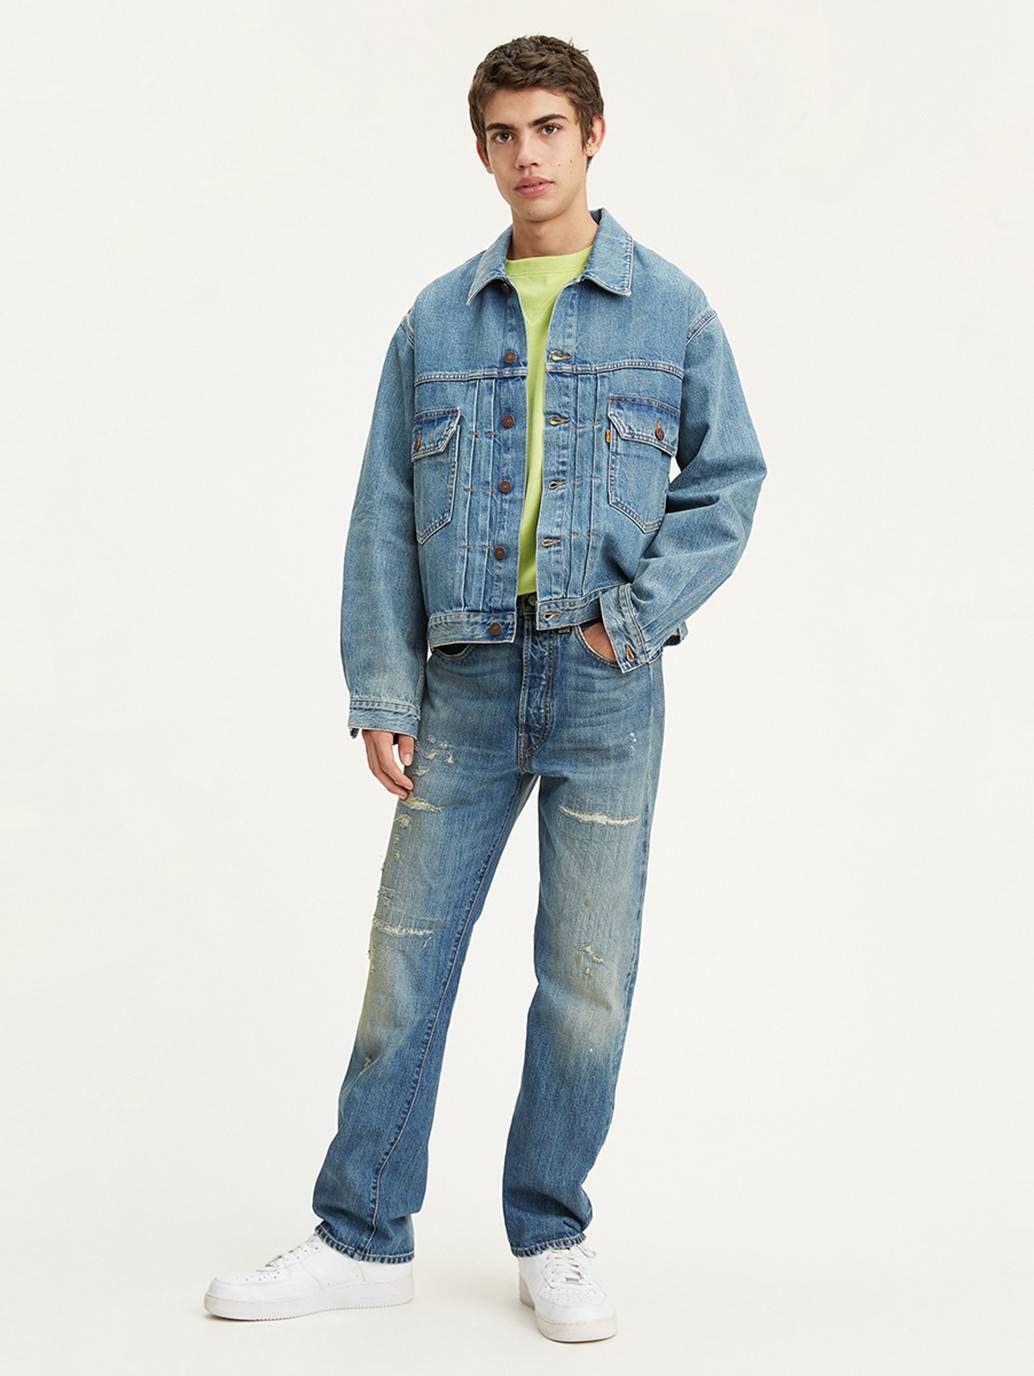 Buy 1947 501® Jeans | Levi's® Official Online Store MY